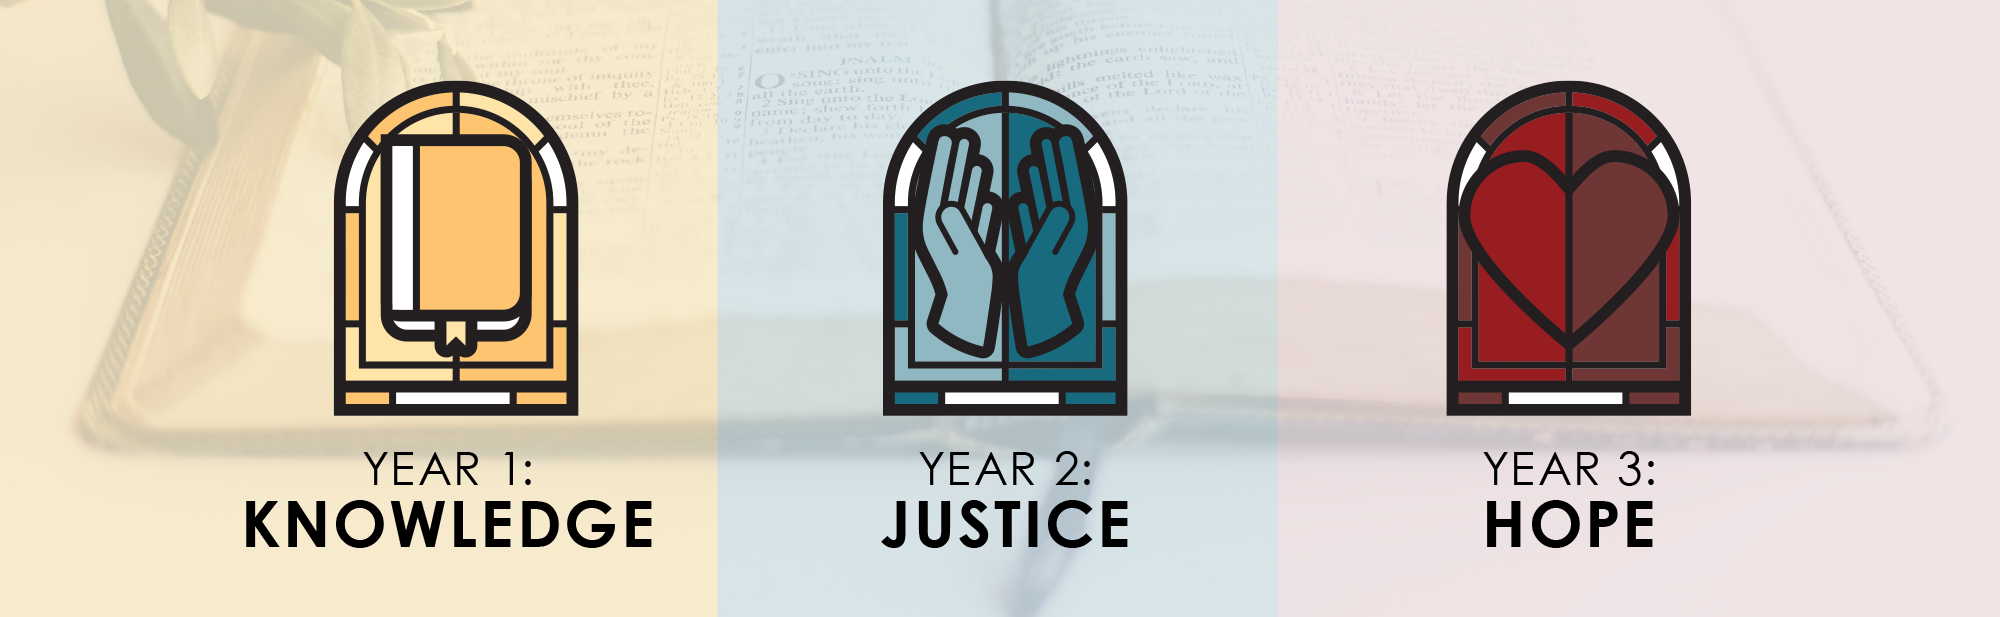 Year 1: Knowledge (a yellow icon of a book illustrated in the style of a stained glass window shown against a washed out yellow photo of a closeup of an open Bible), Year 2: Justice (a blue icon of hands raised in prayer illustrated in the style of a stained glass window shown against a washed out blue photo of a closeup of an open Bible) and Year 3: Hope (a red icon of a heart illustrated in the style of a stained glass window shown against a washed out red photo of a closeup of an open Bible)